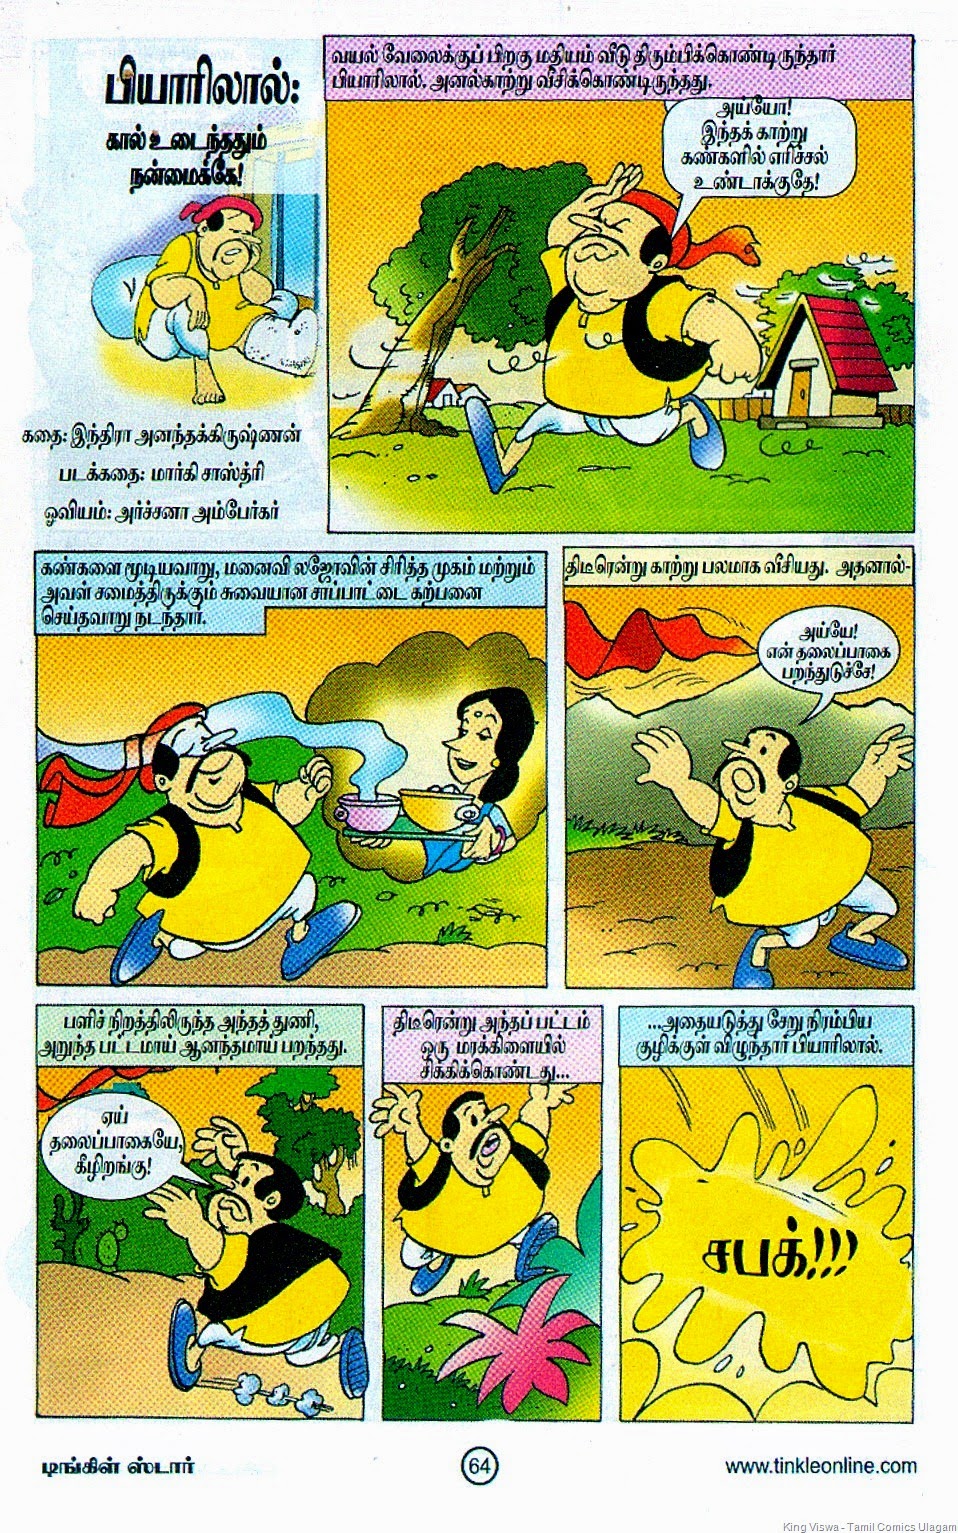 [Tinkle%2520Stars%2520Issue%2520No%25201%2520Dated%252001122014%2520PyareLal%2520Story%2520Page%2520No%252064%255B4%255D.jpg]